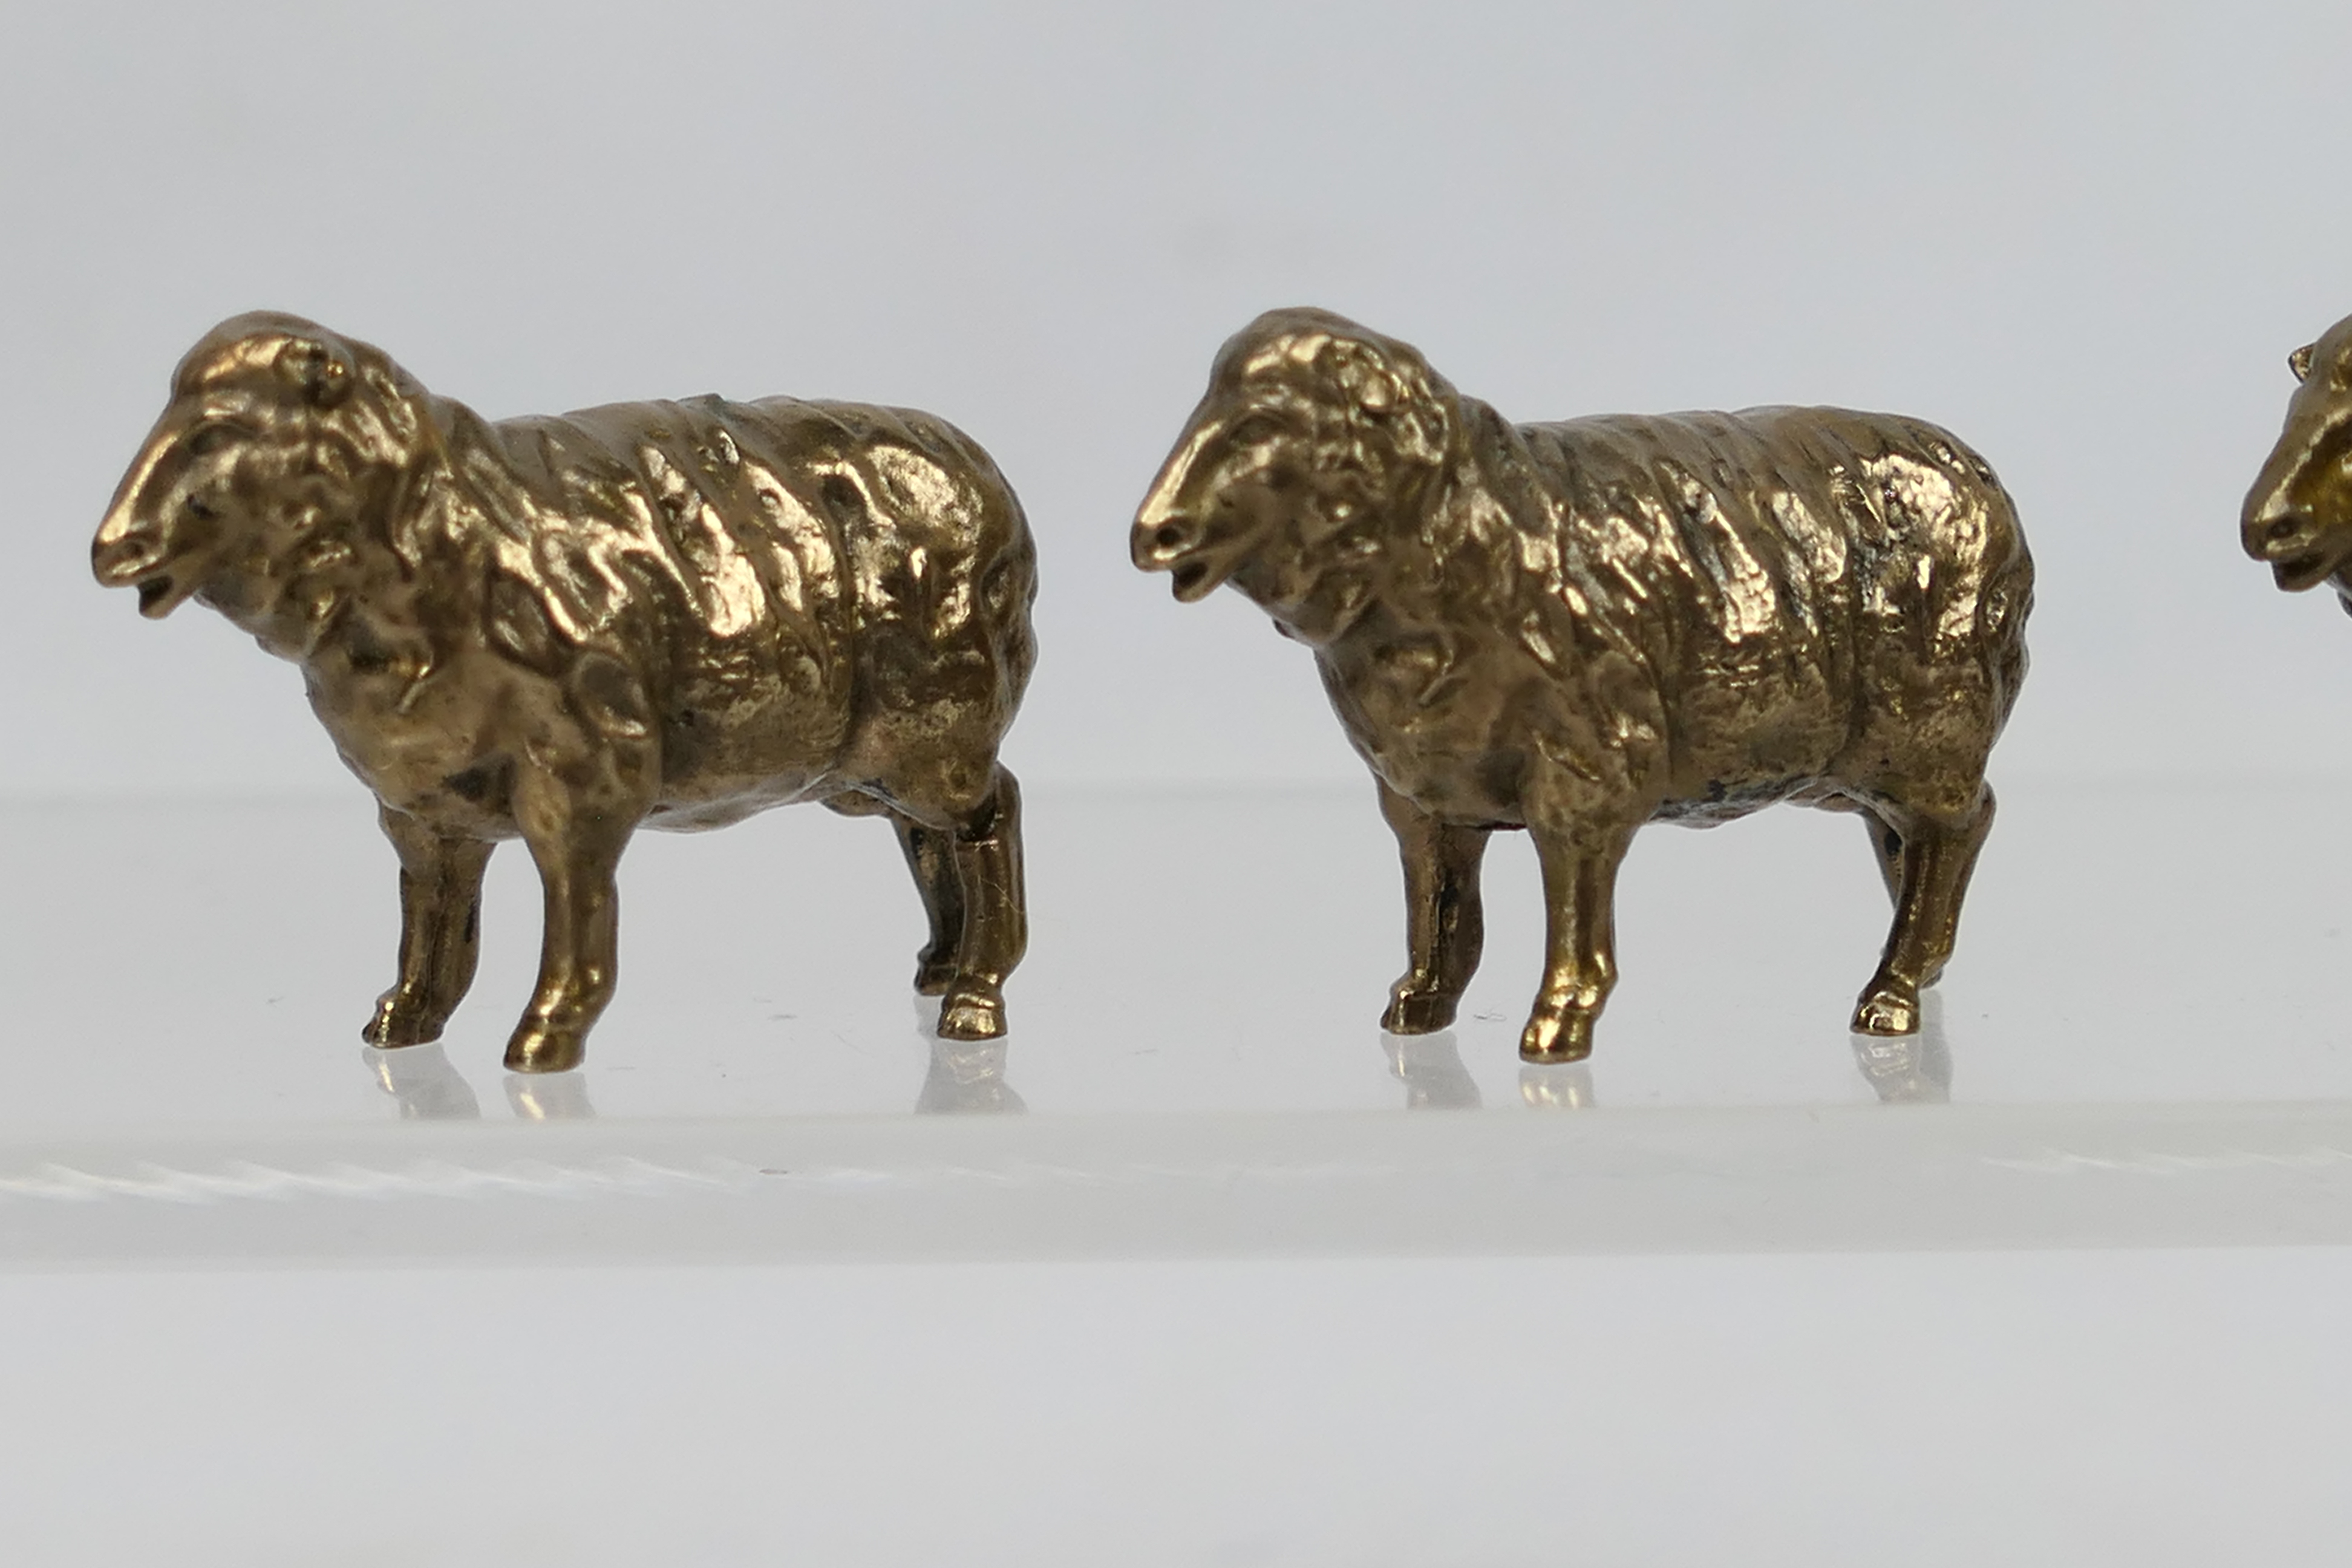 8 x bronze sheep figures. All in same si - Image 2 of 6